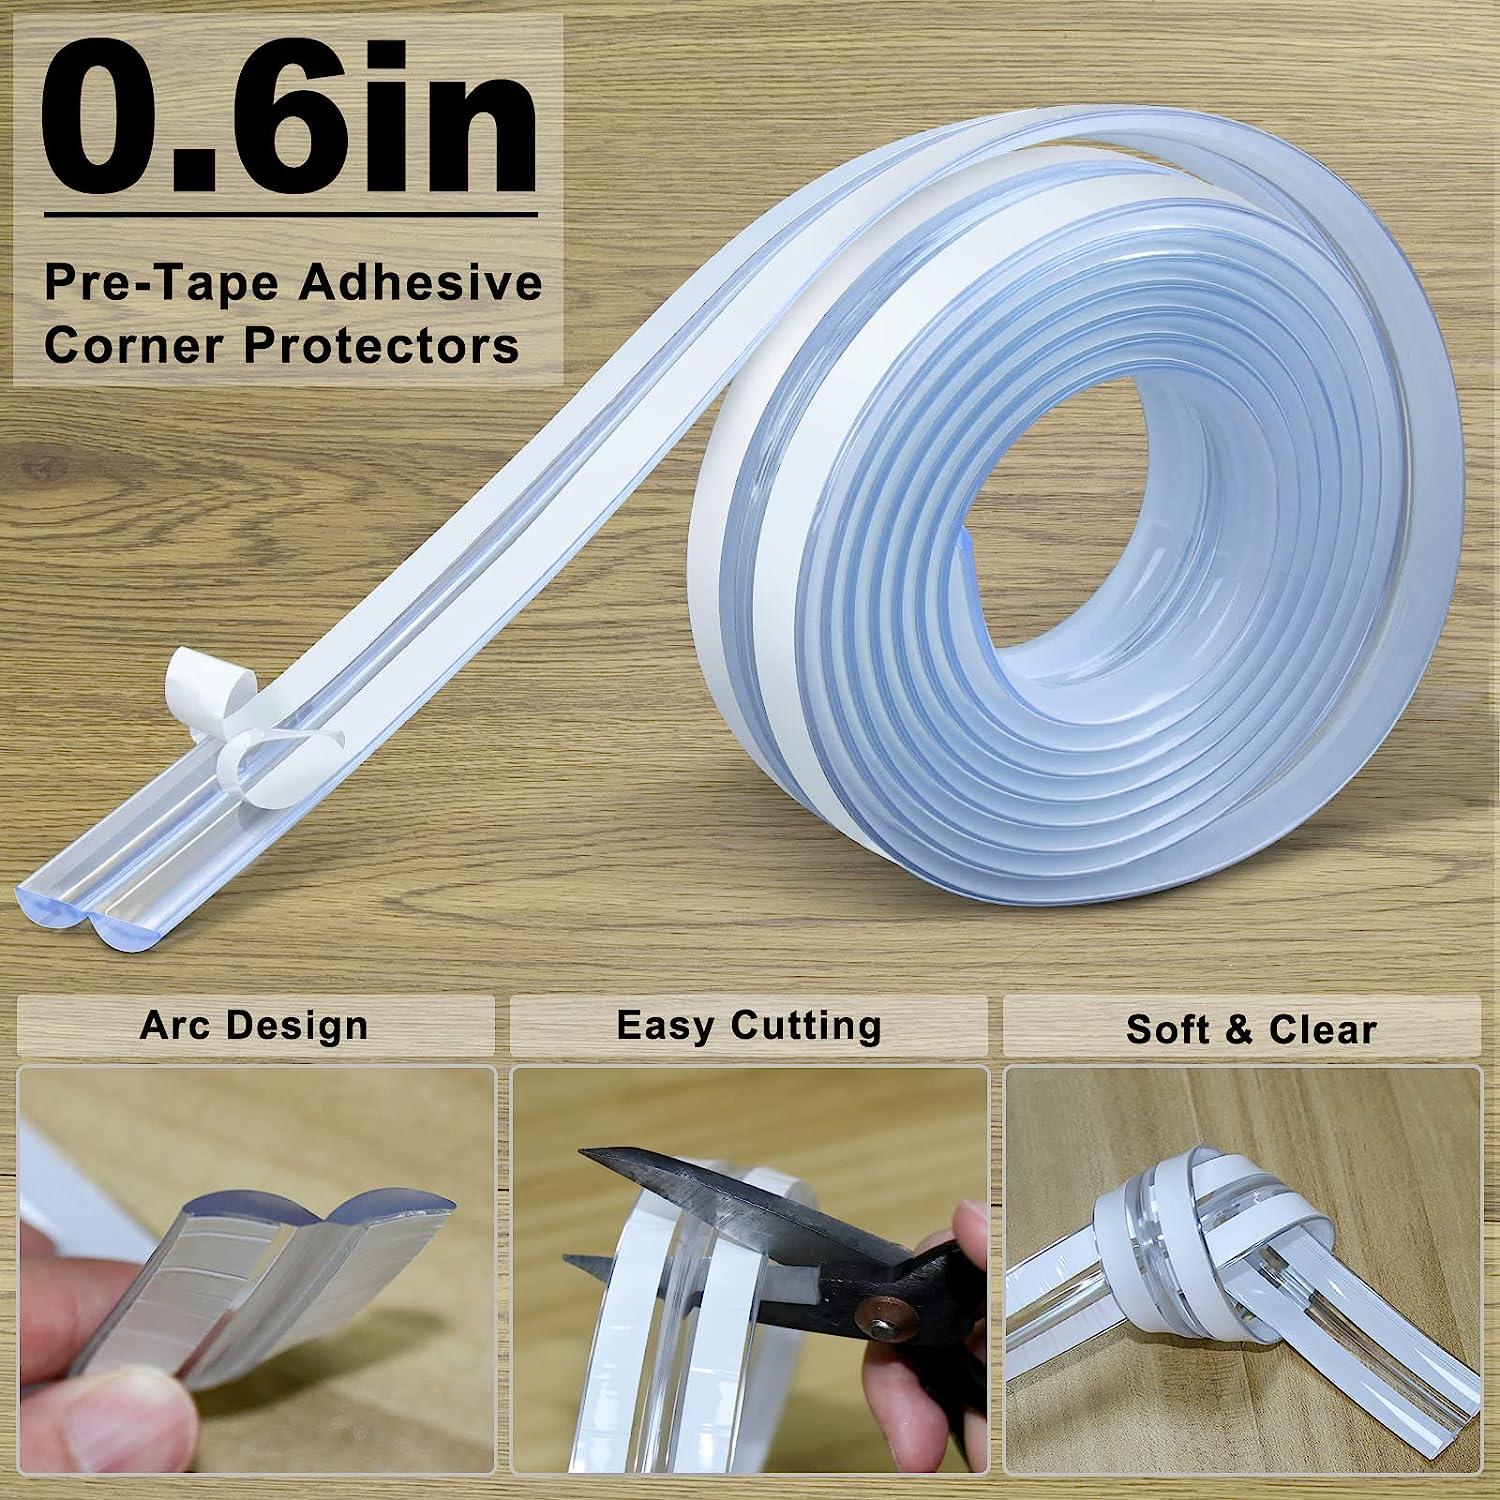 Clear Corner Protectors - Furniture Edge Bumpers With Strong Adhesive,  6.6ft for Baby Proofing and Safety